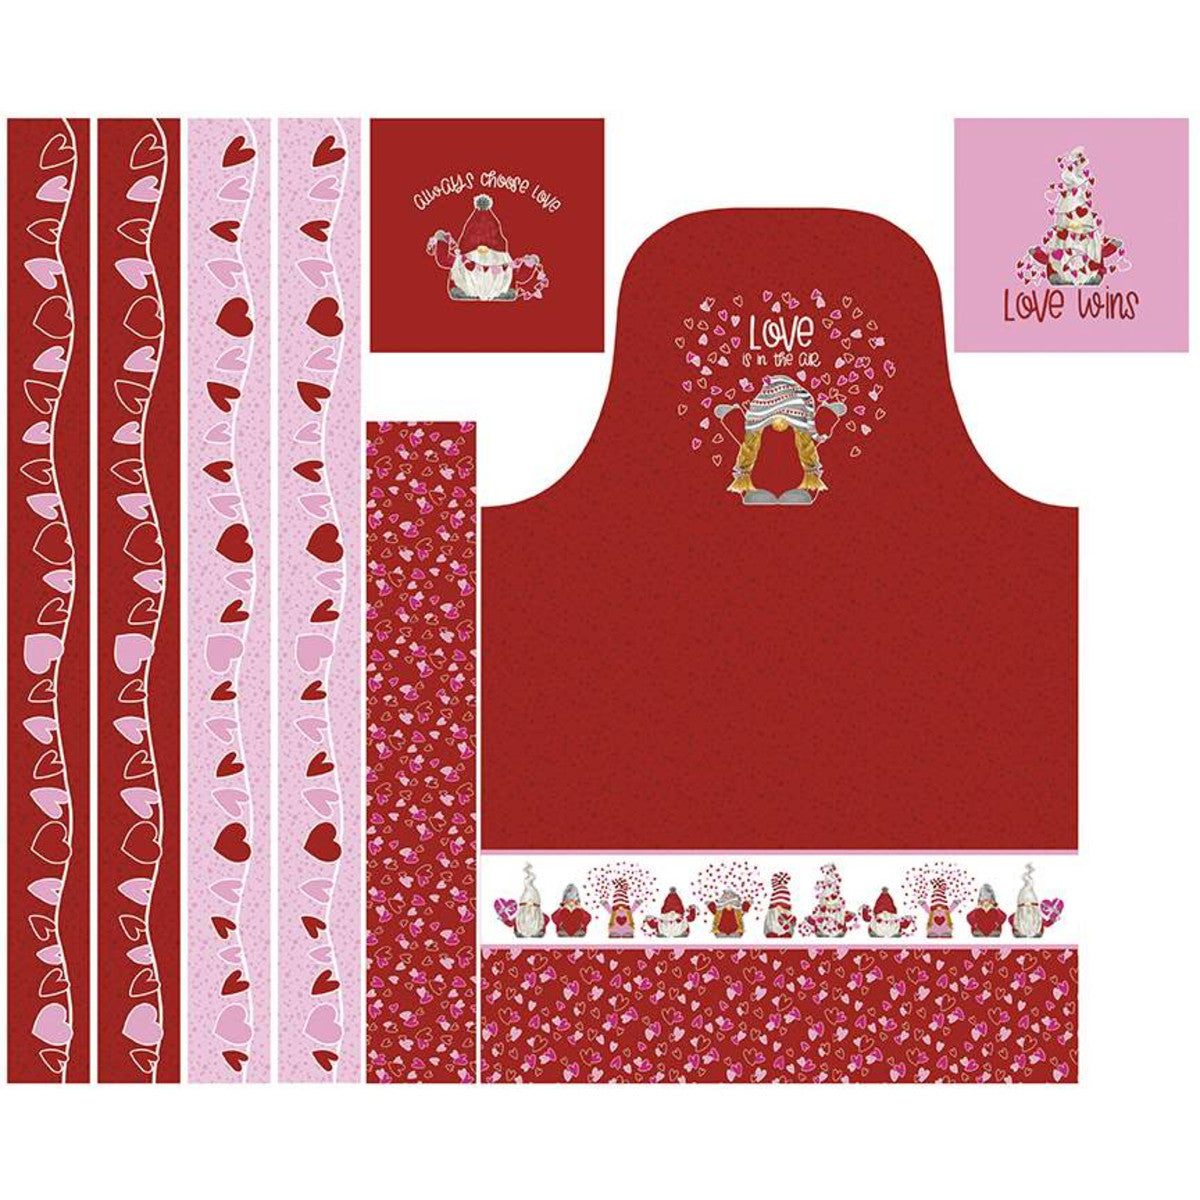 Gnomes In Love by Tara Reed 36" Panel Apron and Hot Pad P11314-PANEL Cotton Woven Panel